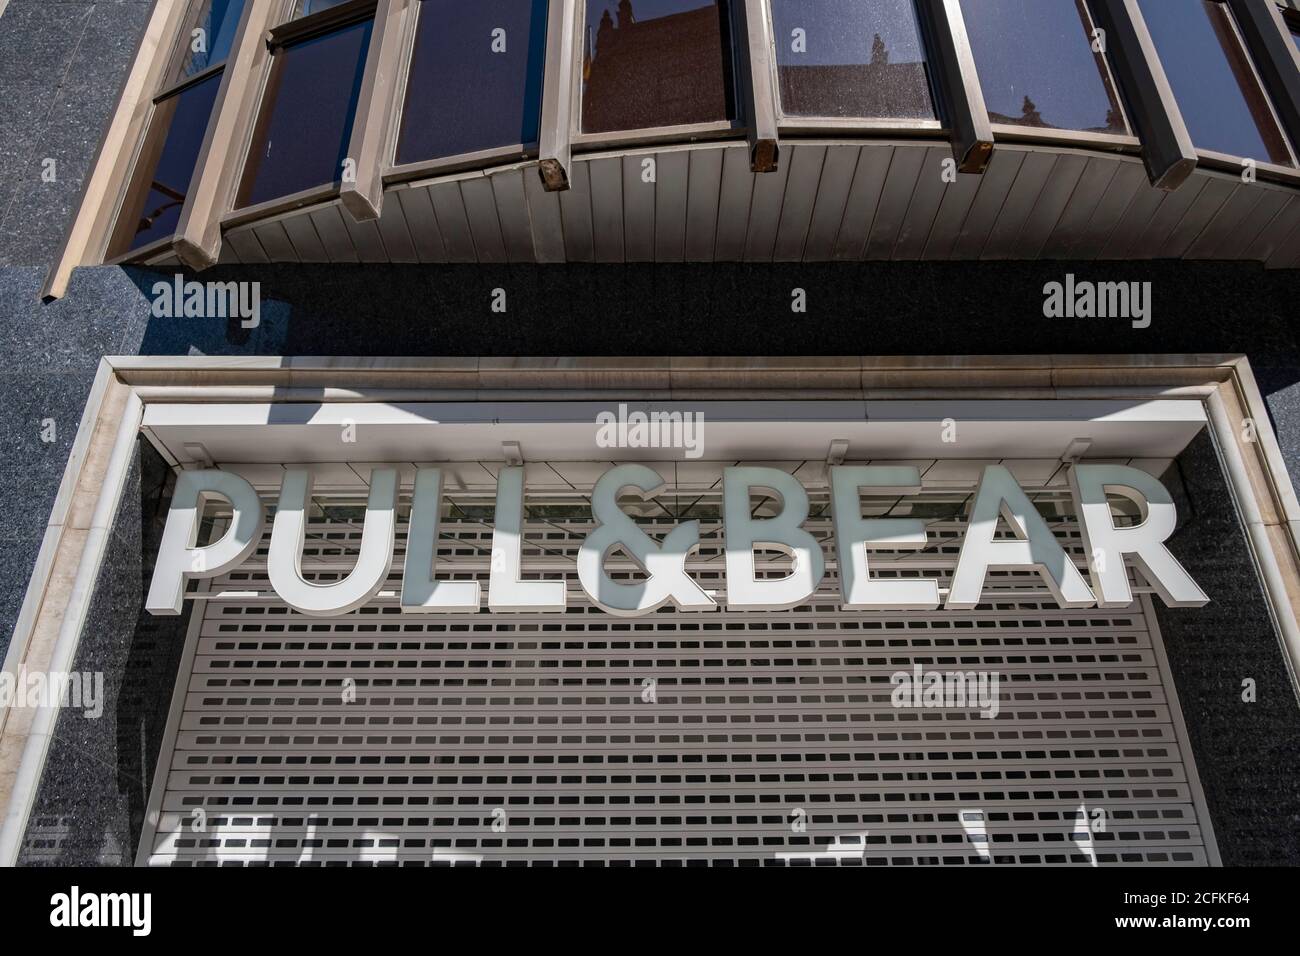 pull and bear owned by zara